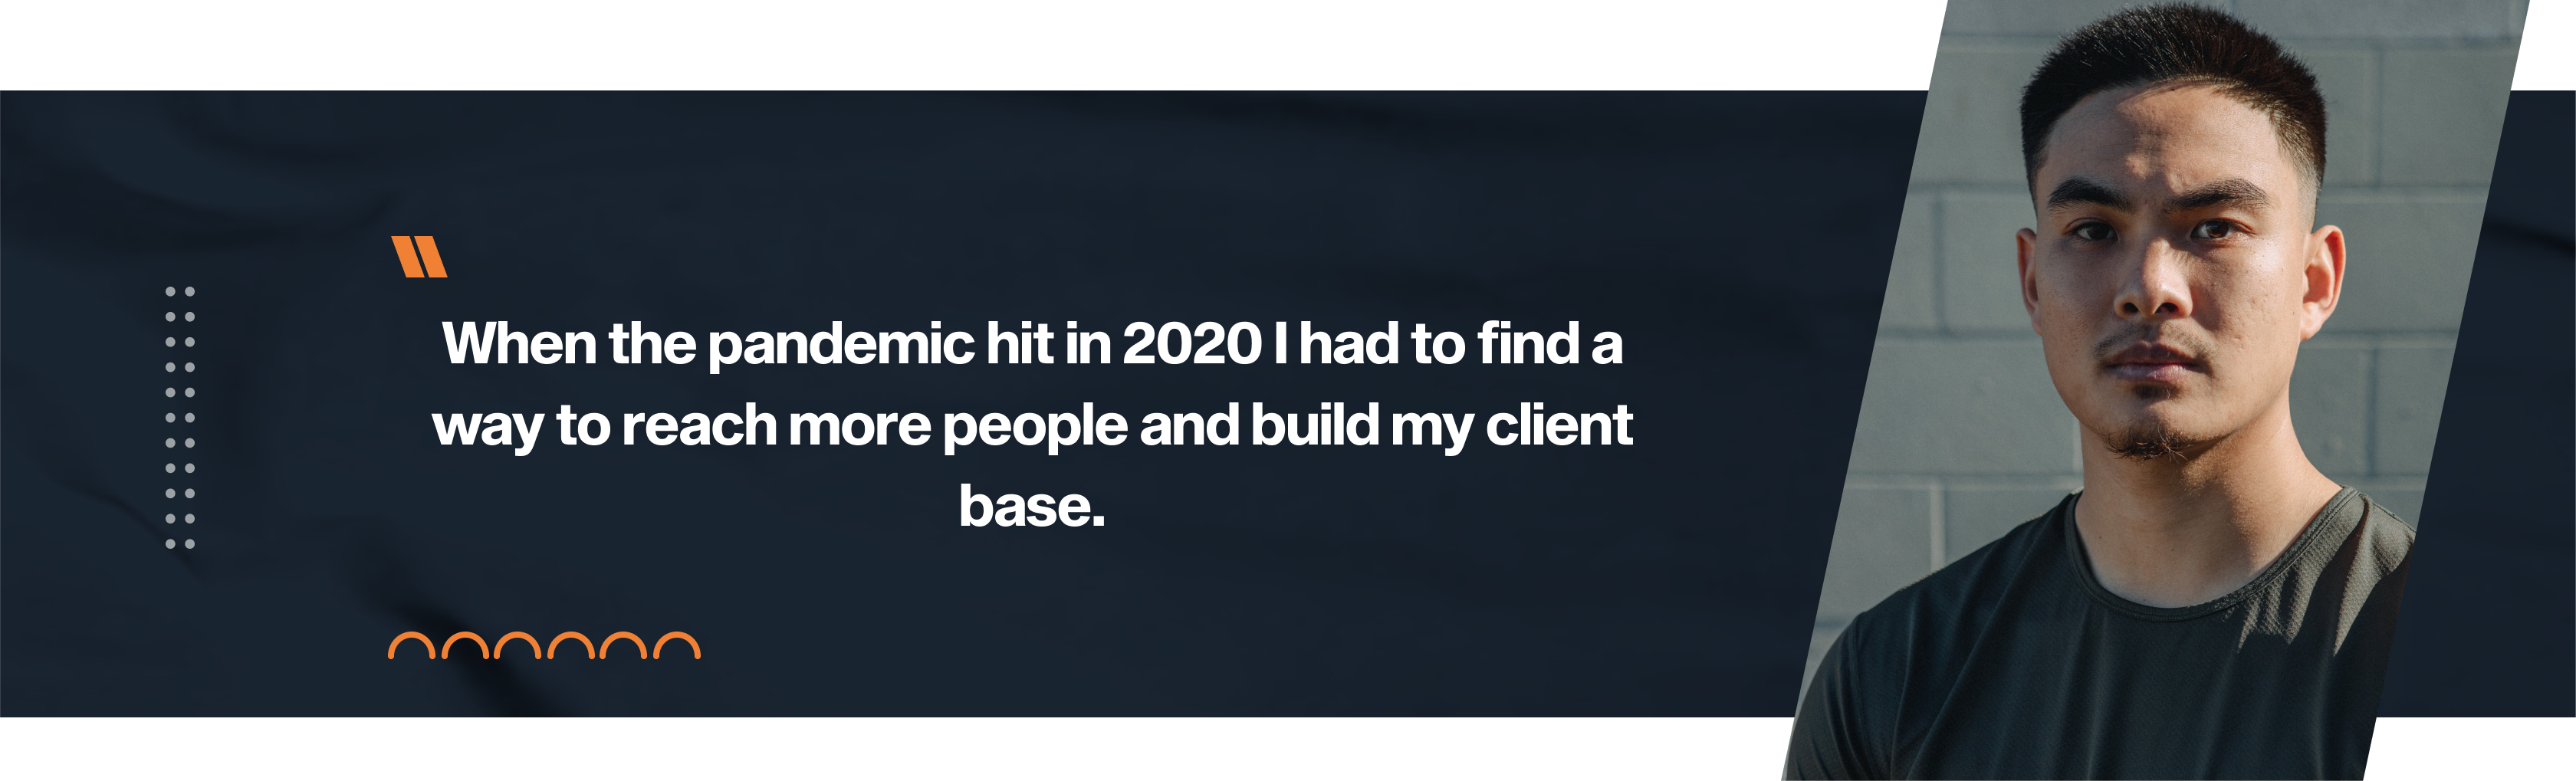 When the pandemic hit in 2020 I had to find a way to reach more people and build my client base